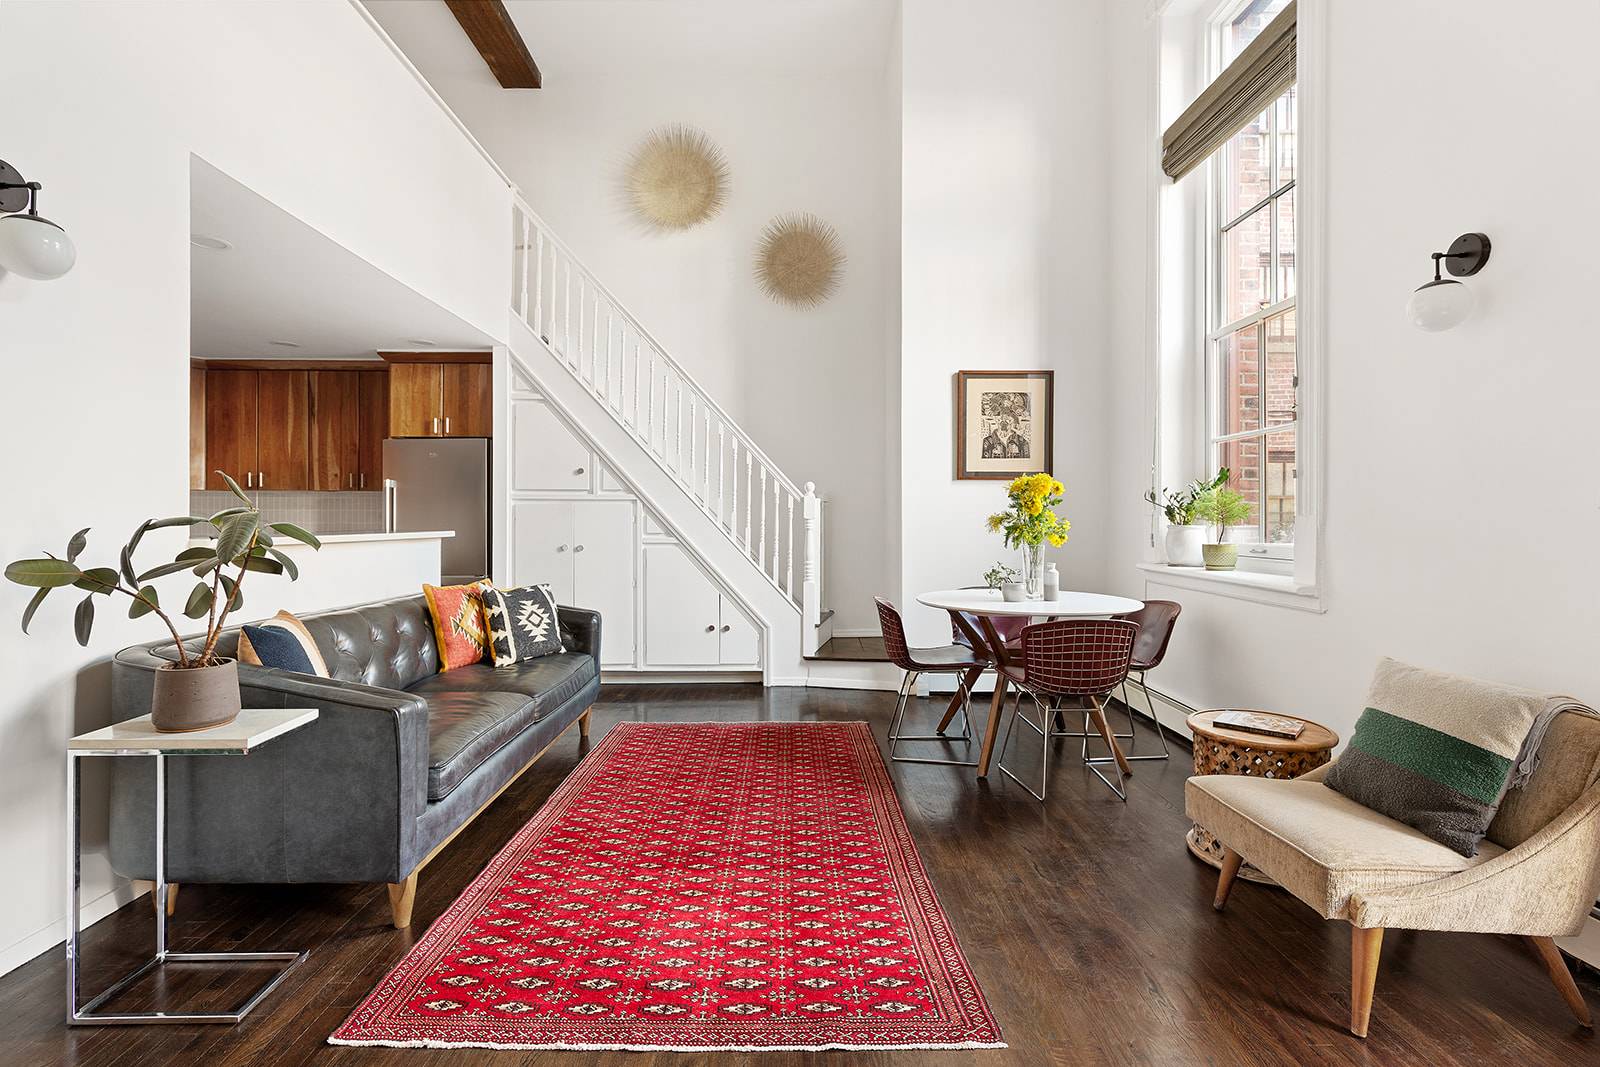 Finally ! Here is a rare opportunity to purchase a chic Cobble Hill triplex with all the bells and whistles you ve been dreaming of.